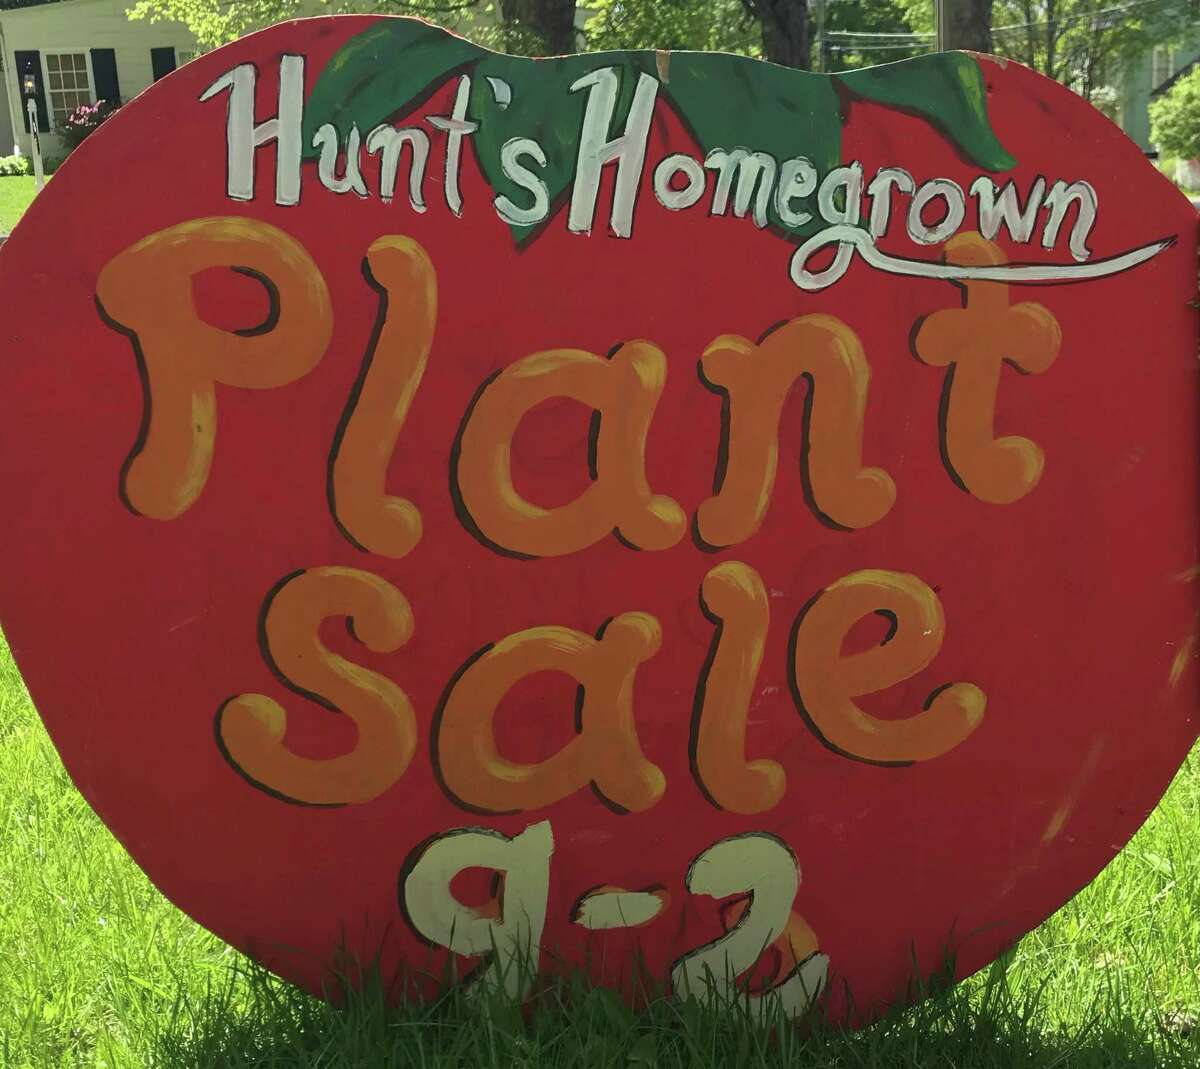 The Hunt Library is holding its annual homegrown plant sale May 21-22.